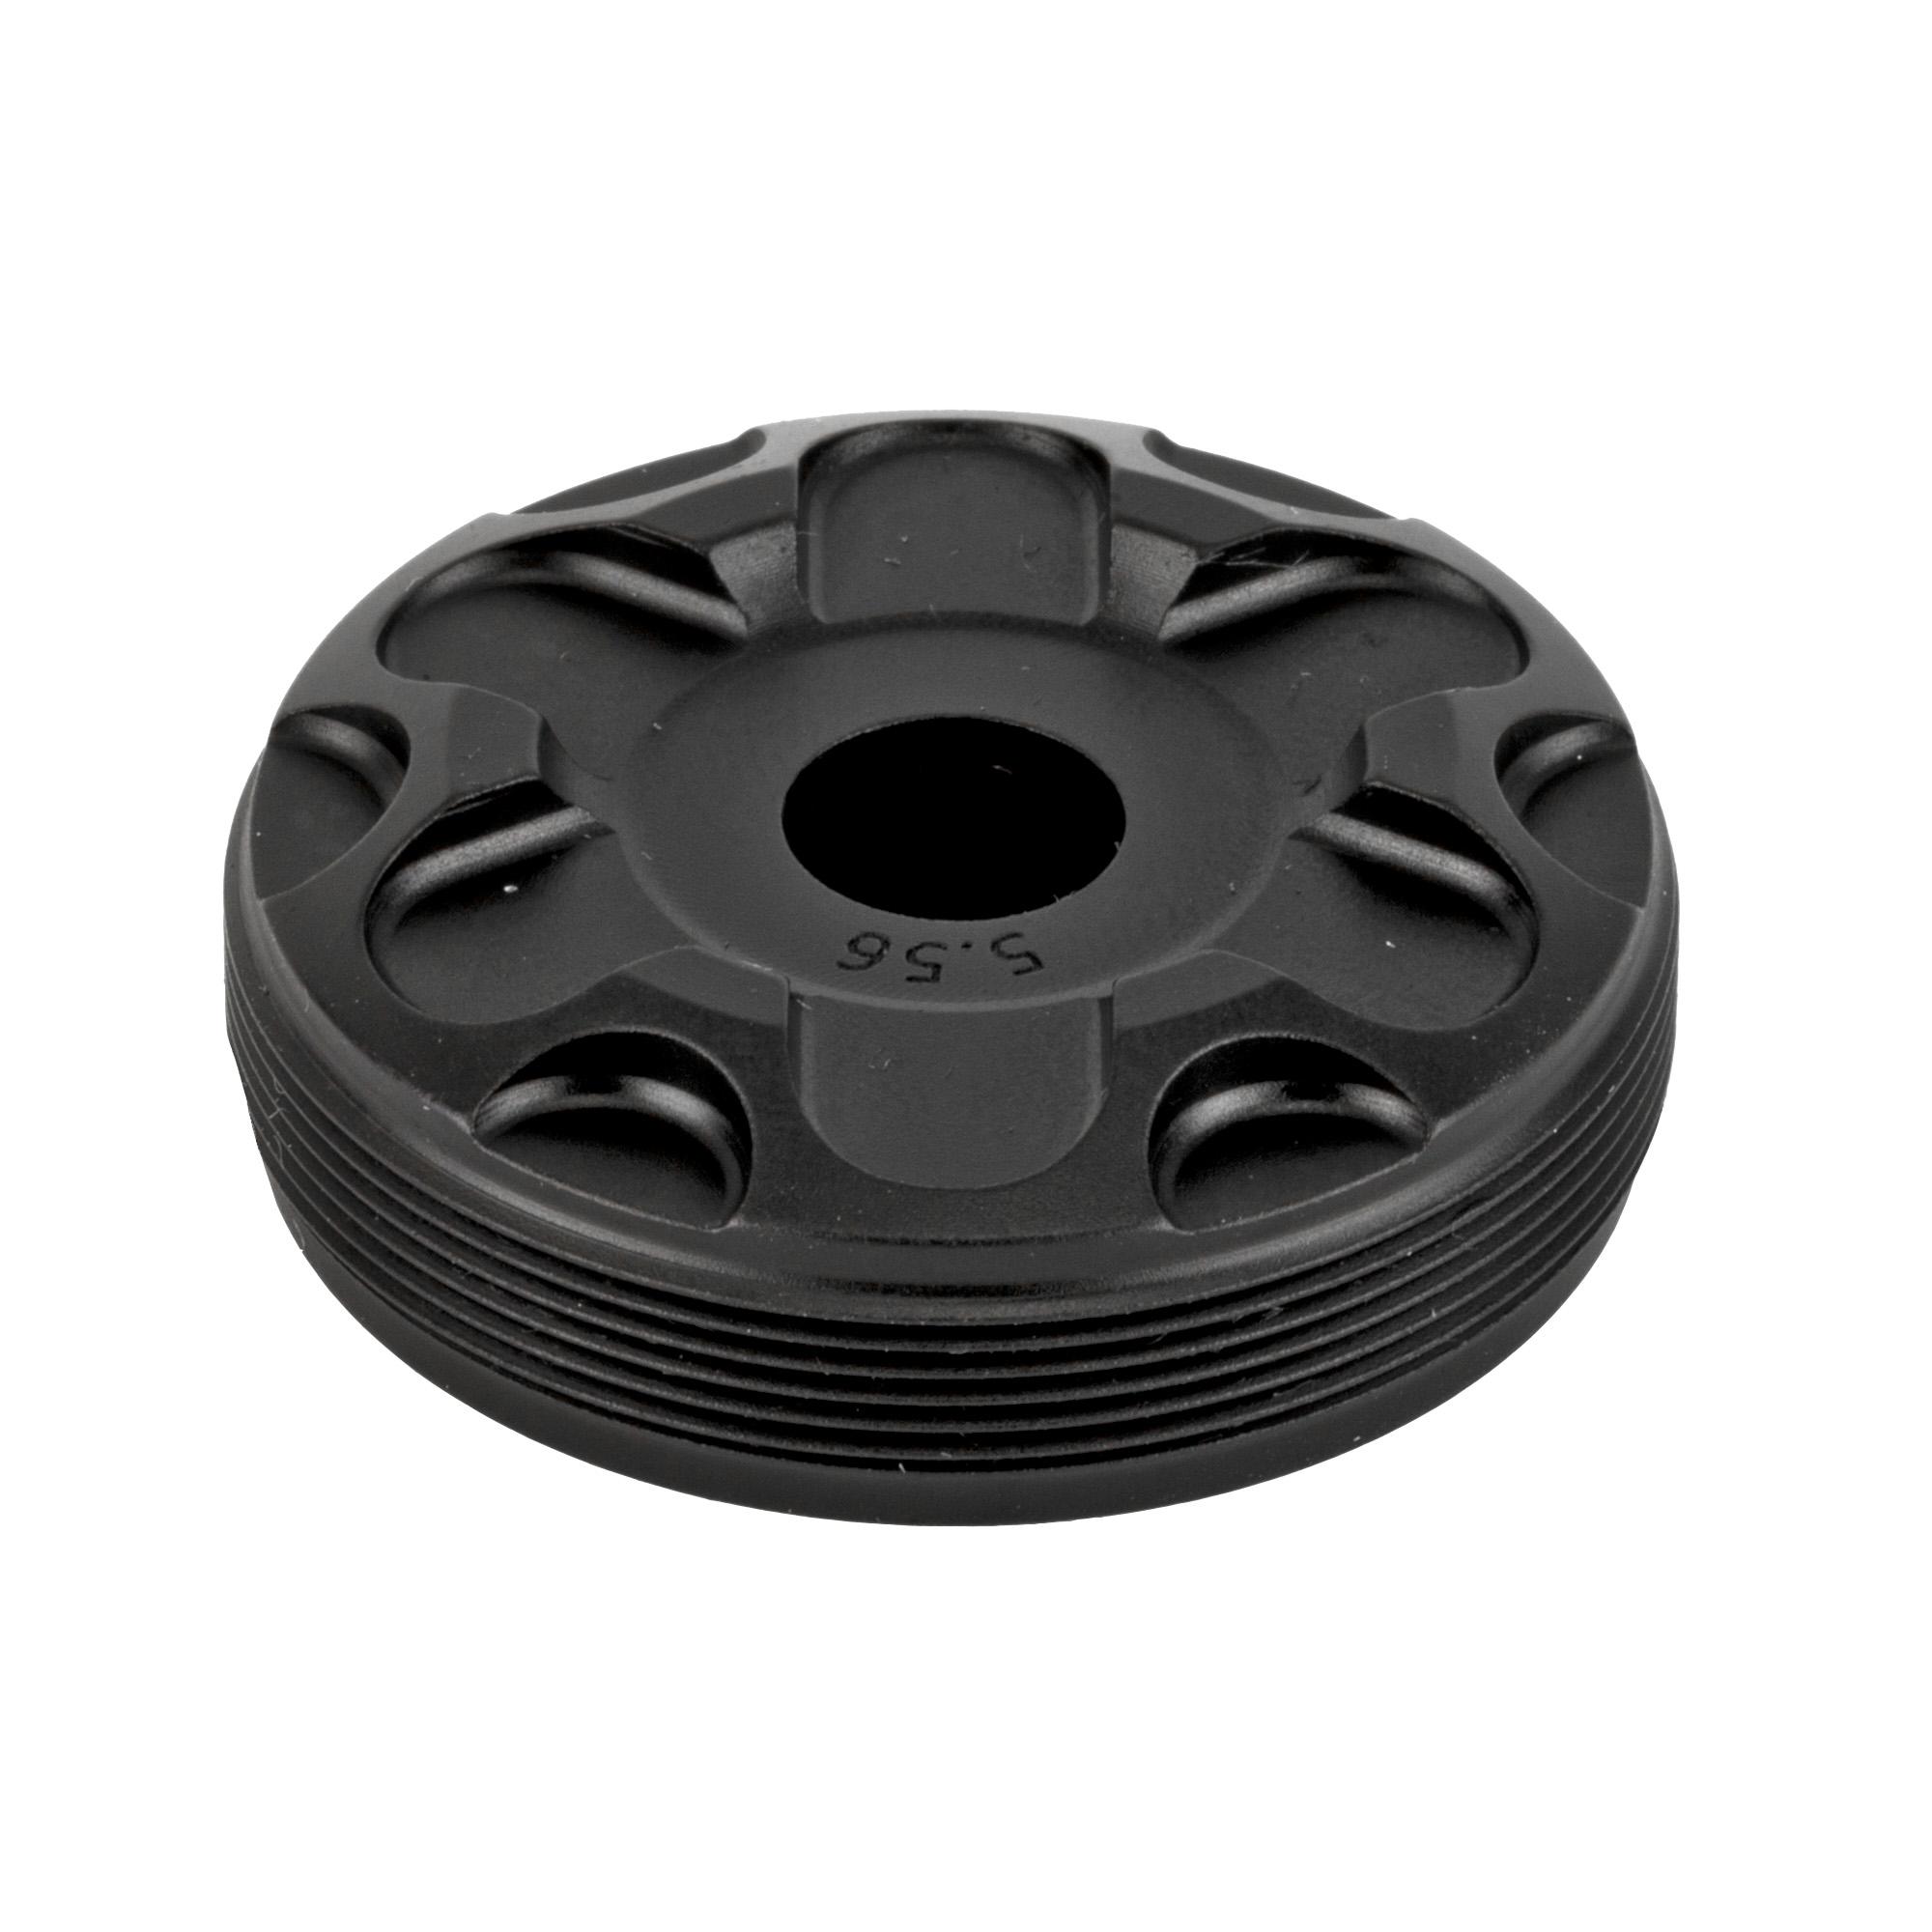 Rugged Front Cap 5.56